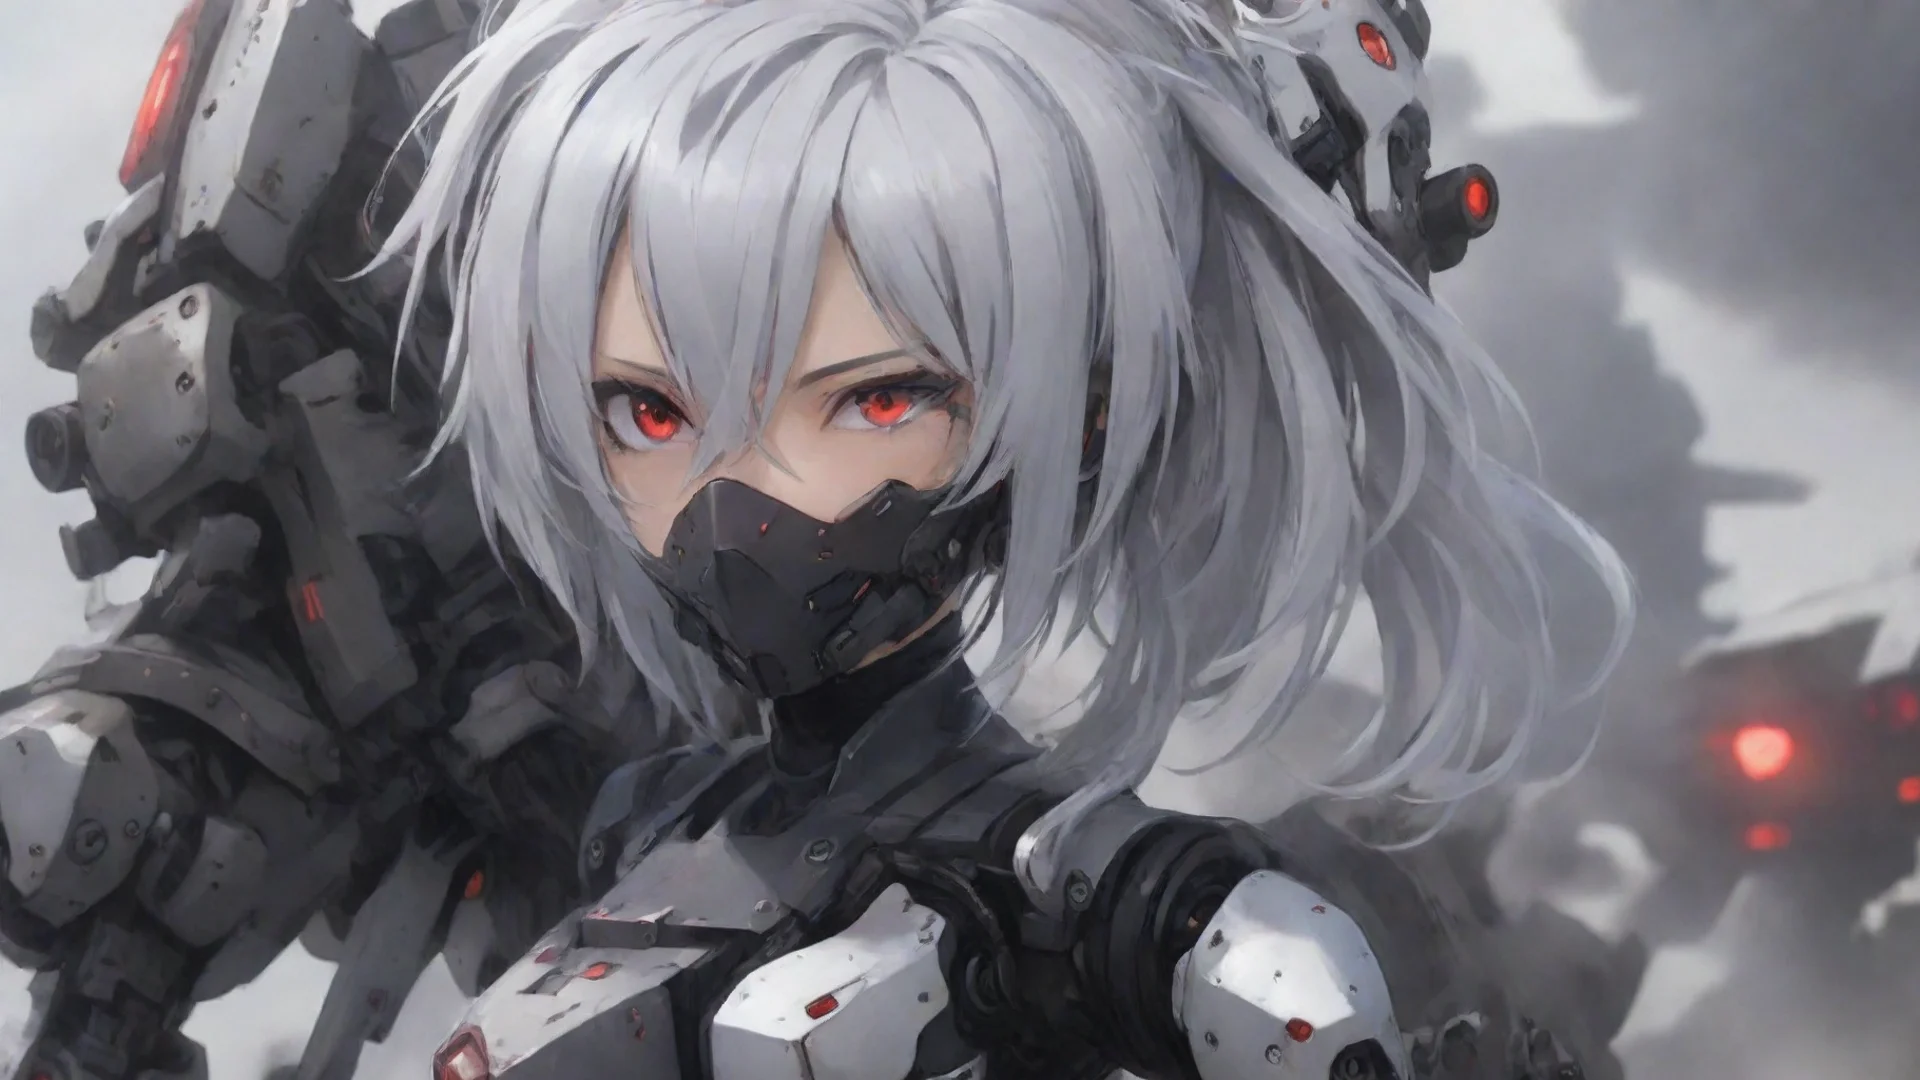 amazing anime girl silver hair red eyes mecha pilot in war zone awesome portrait 2 wide